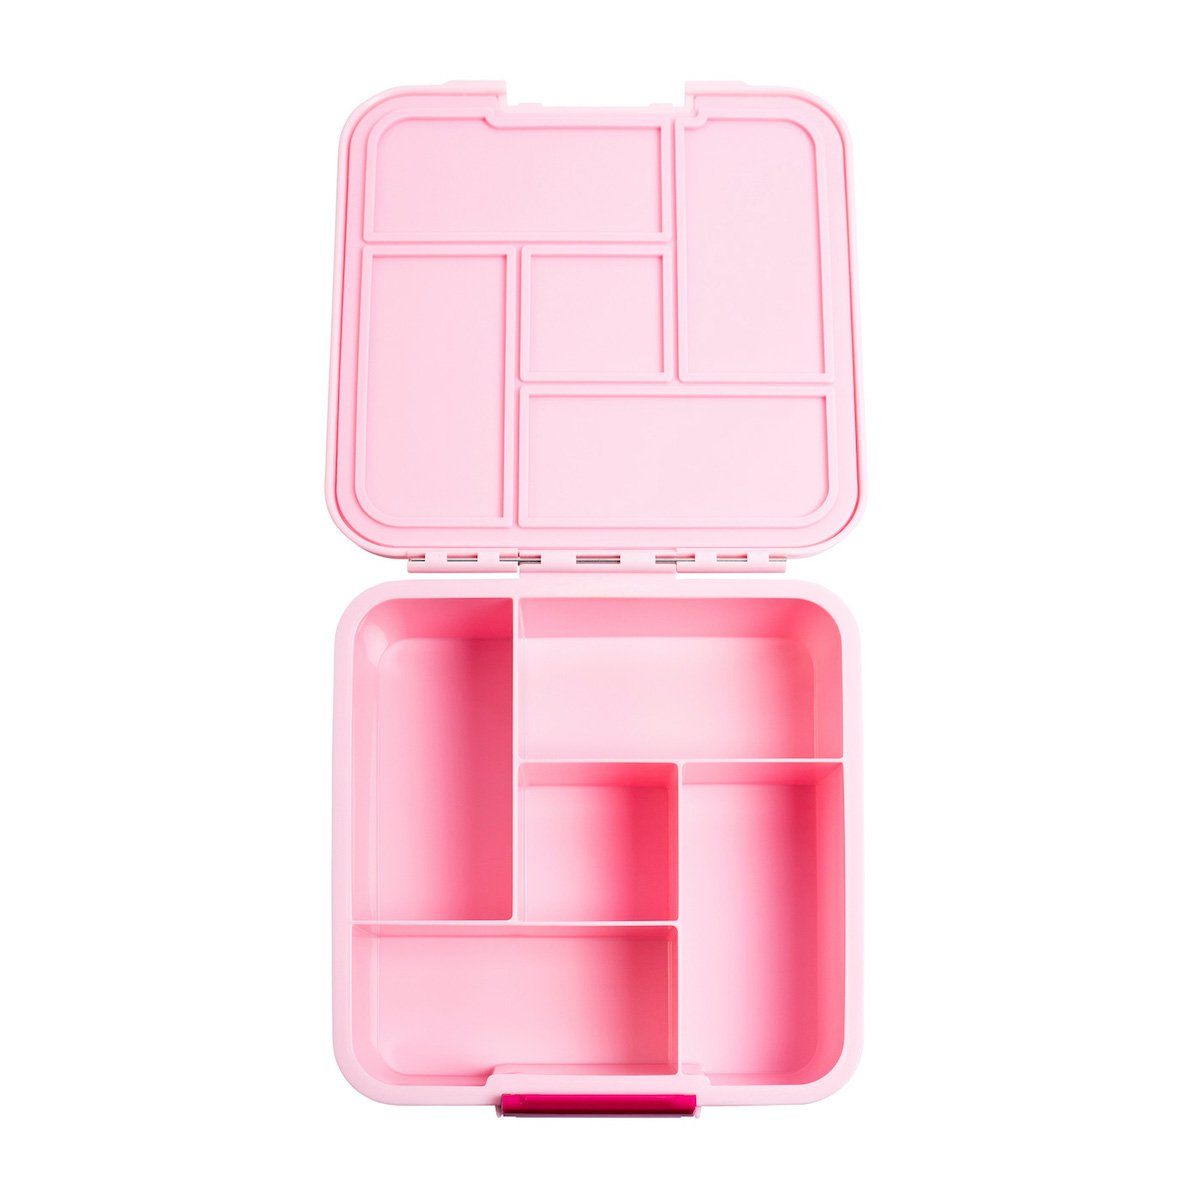 Little Lunch Box Co. Bento Five: Pink Bento Box by Little Lunch Box Co. | Cute Kid Stuff